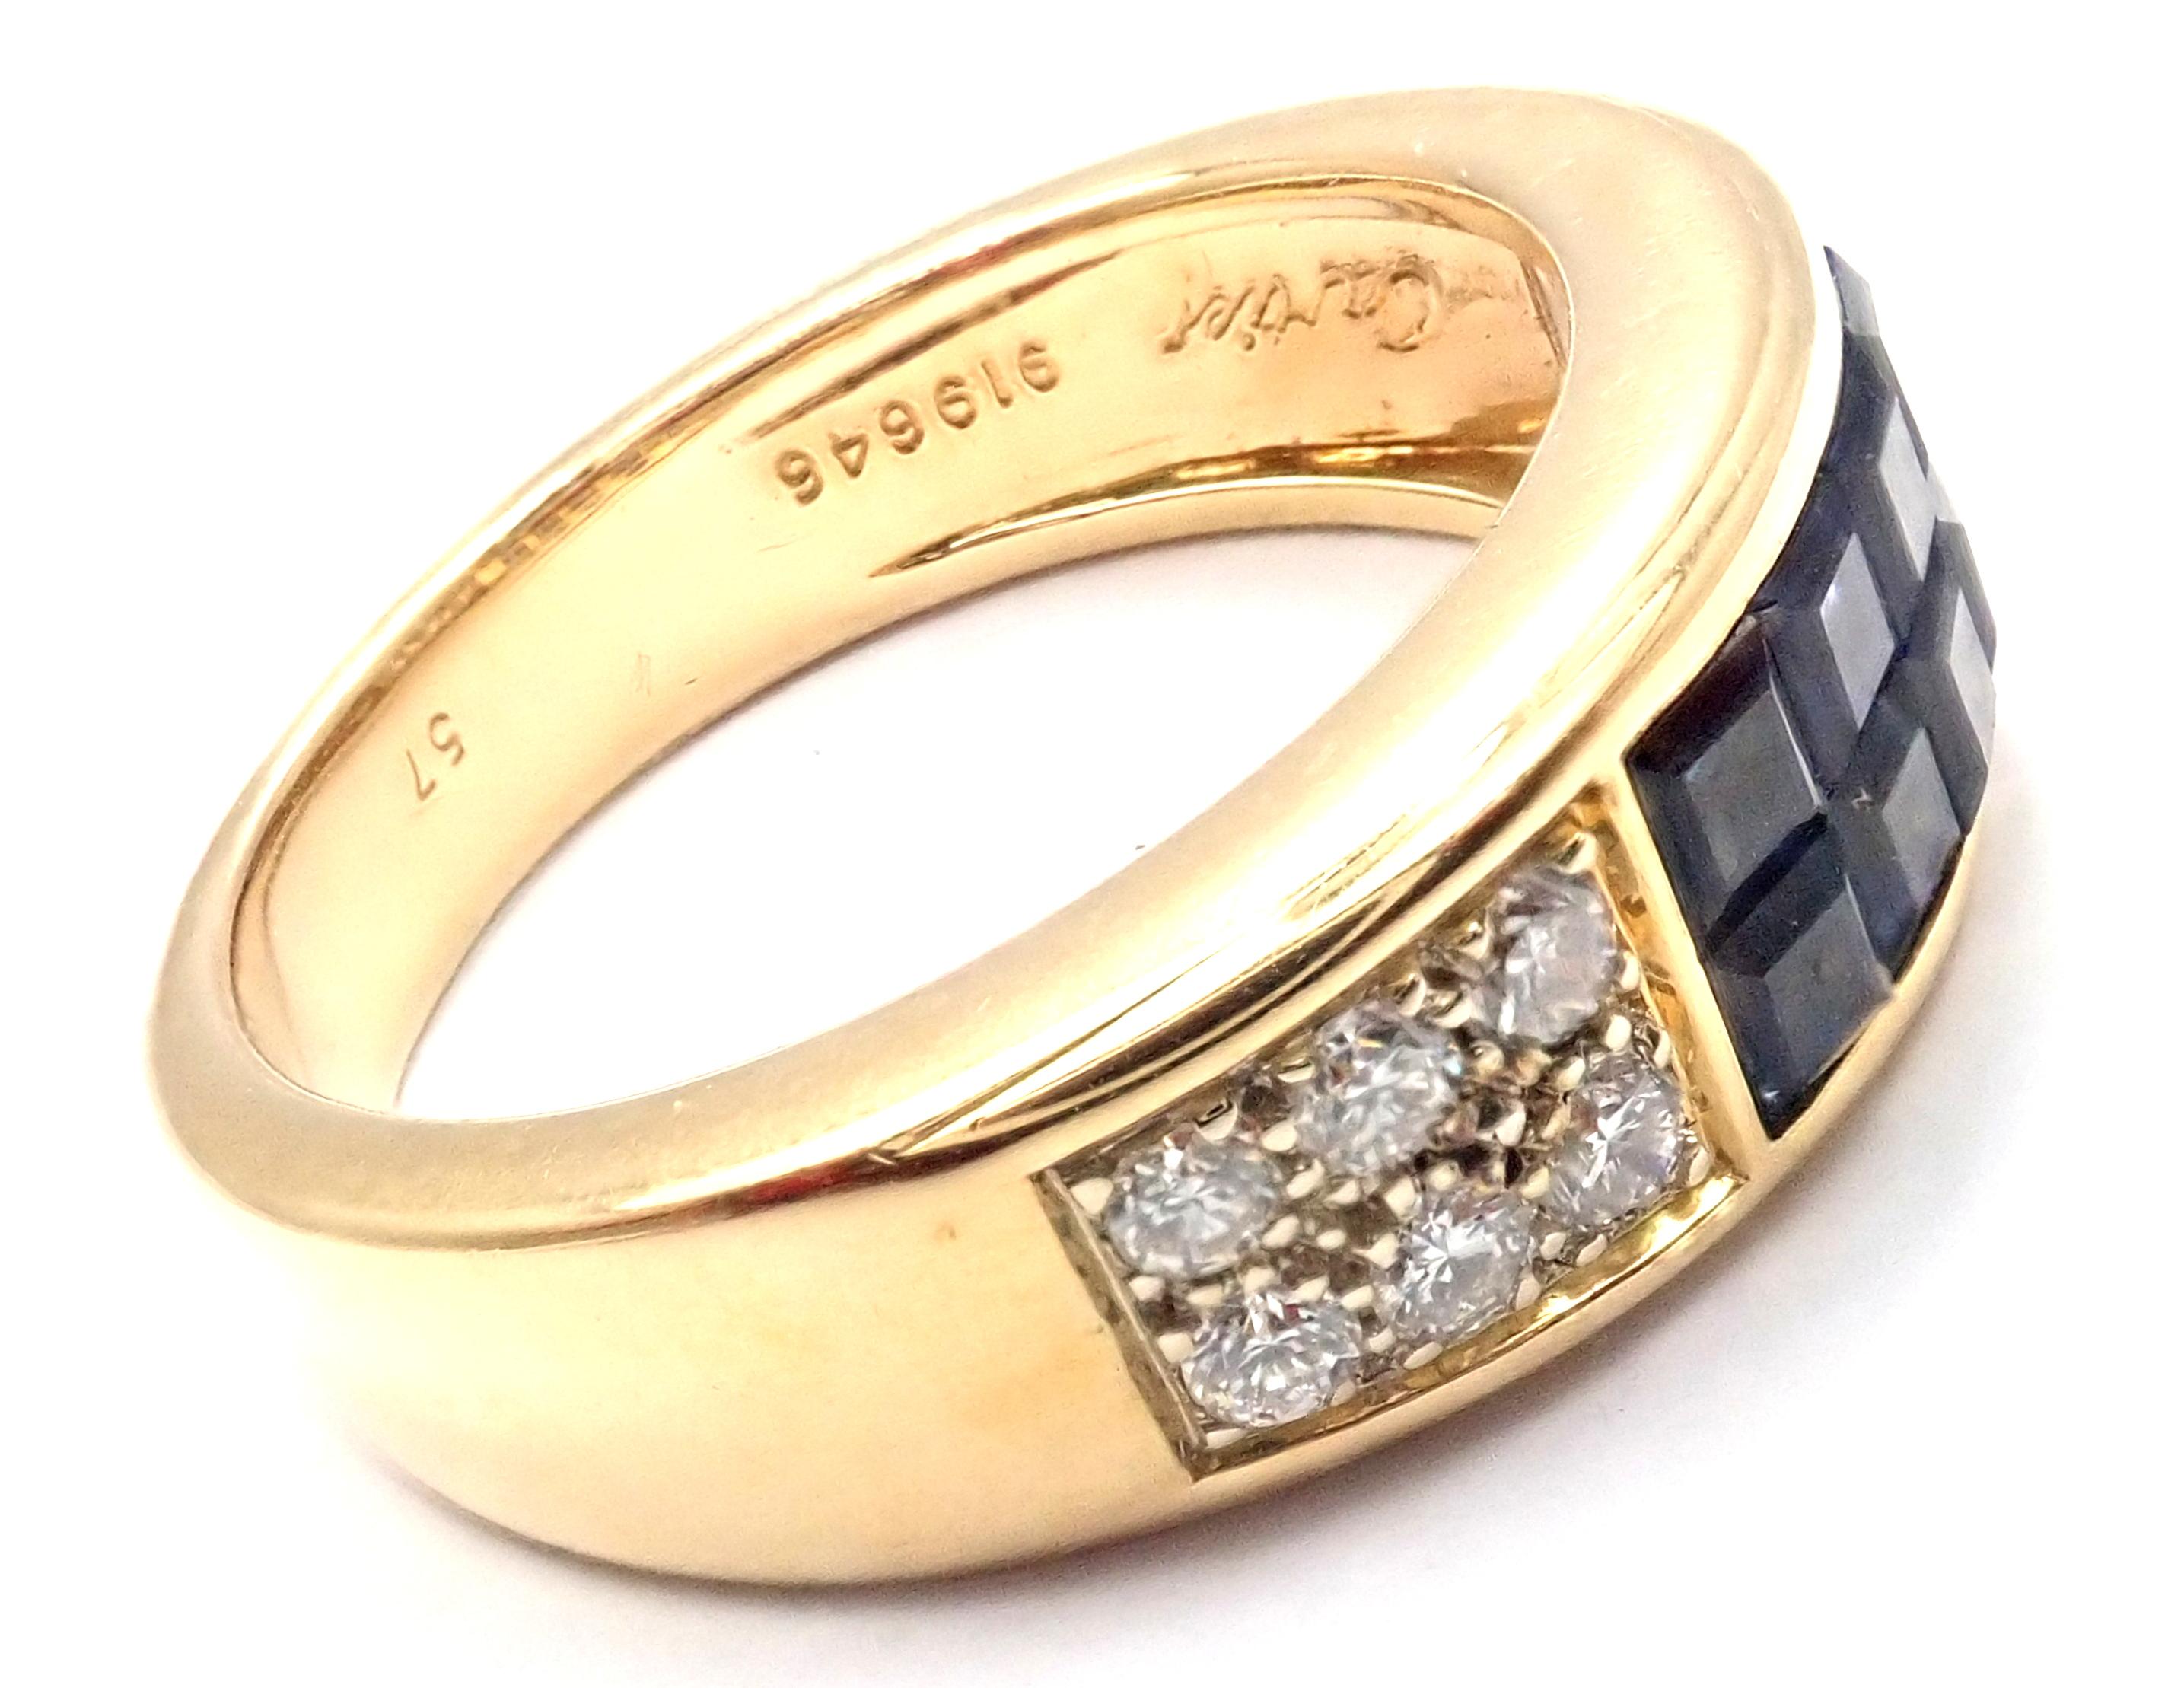 18k Yellow Gold Diamond and Invisible Set Sapphire Diabolo Ring by Cartier.
With 12 round brilliant cut diamonds VS1 clarity and G color approx. .50ct total weight 
8 sapphires total weight approx. 1ct
Details:
Ring Size:  US 8, European 57
Width: